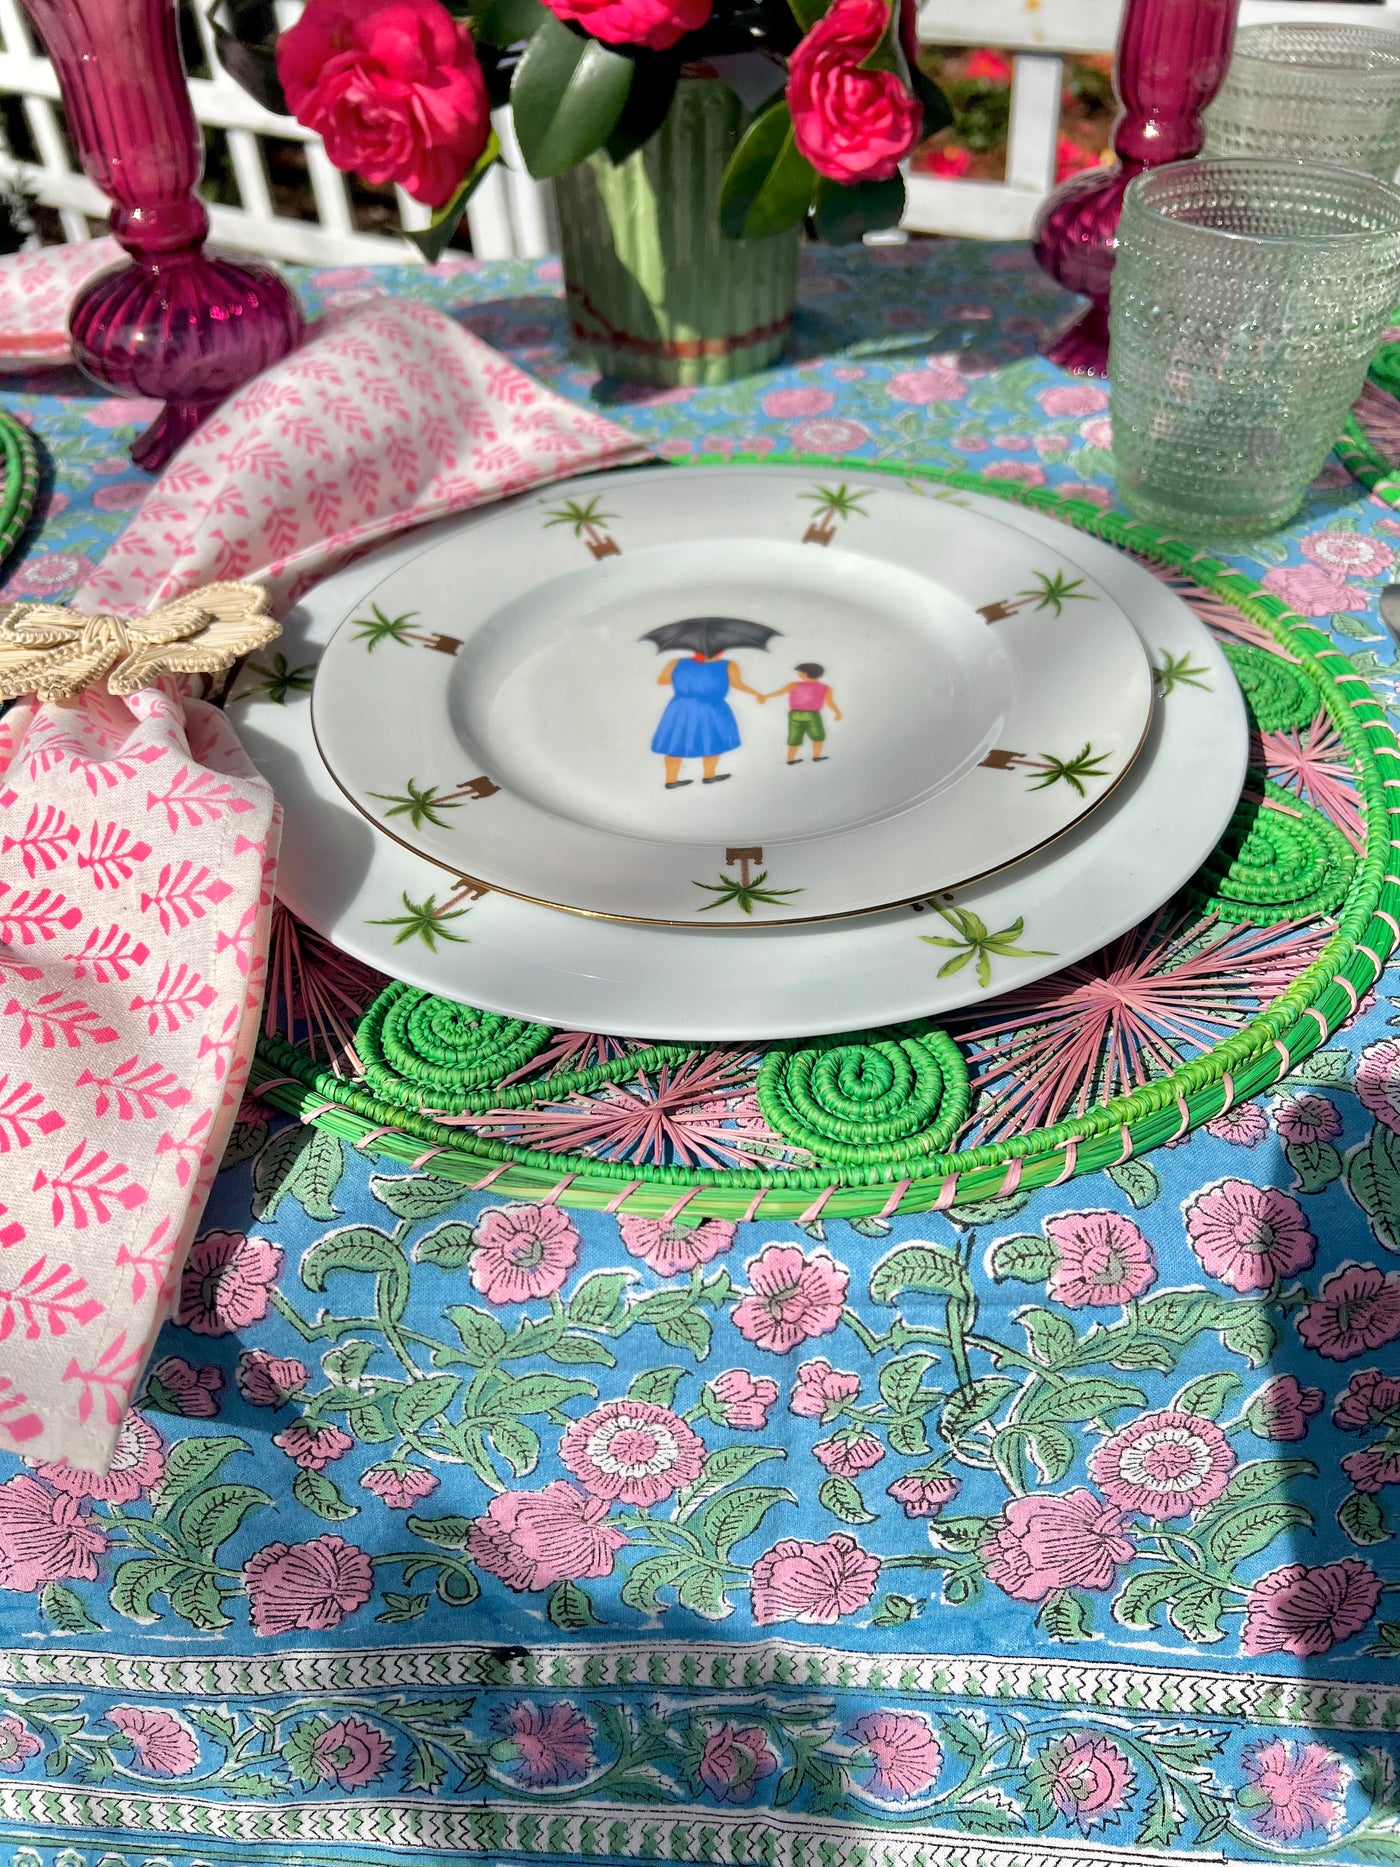 Handwoven Palm Placemats in Pink & Green